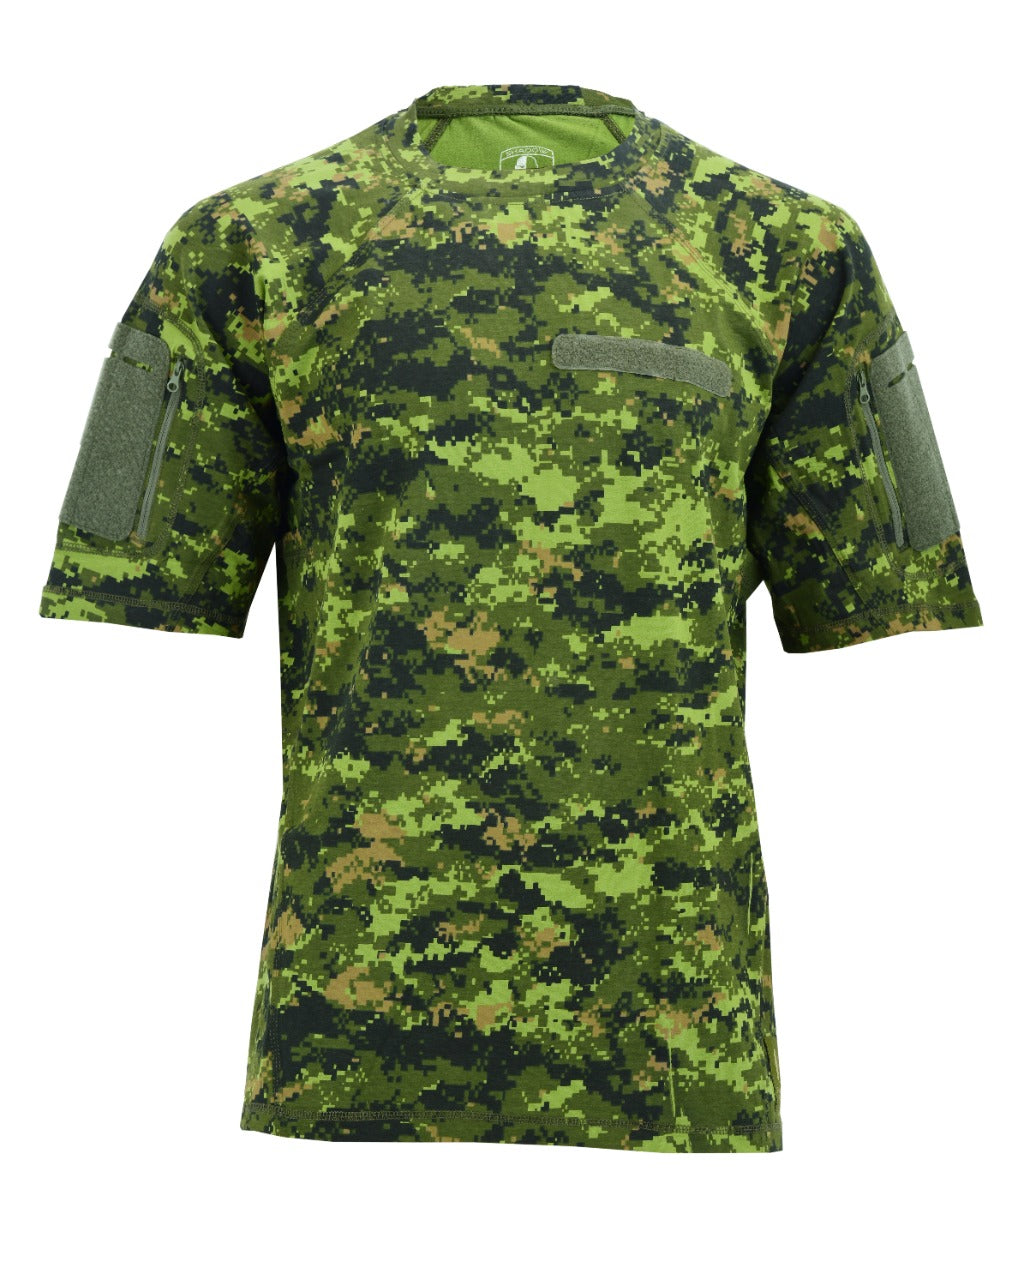 Tactical Zone instructor shirt in CadPat Camo  Front